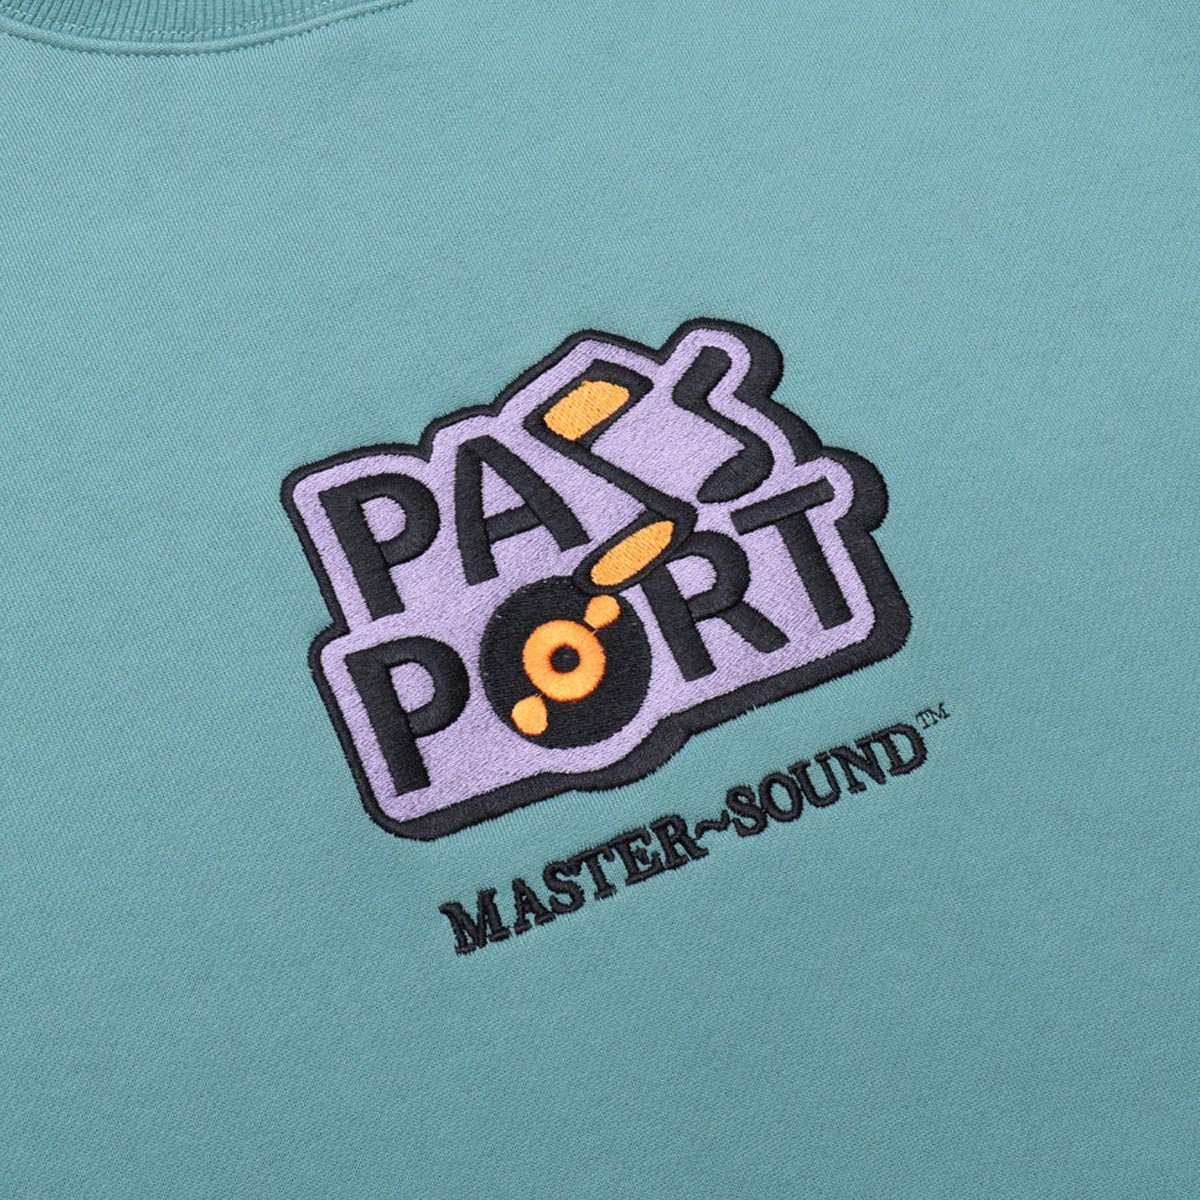 Passport Master Sound Embroidered Sweater - Washed Out Teal image 2